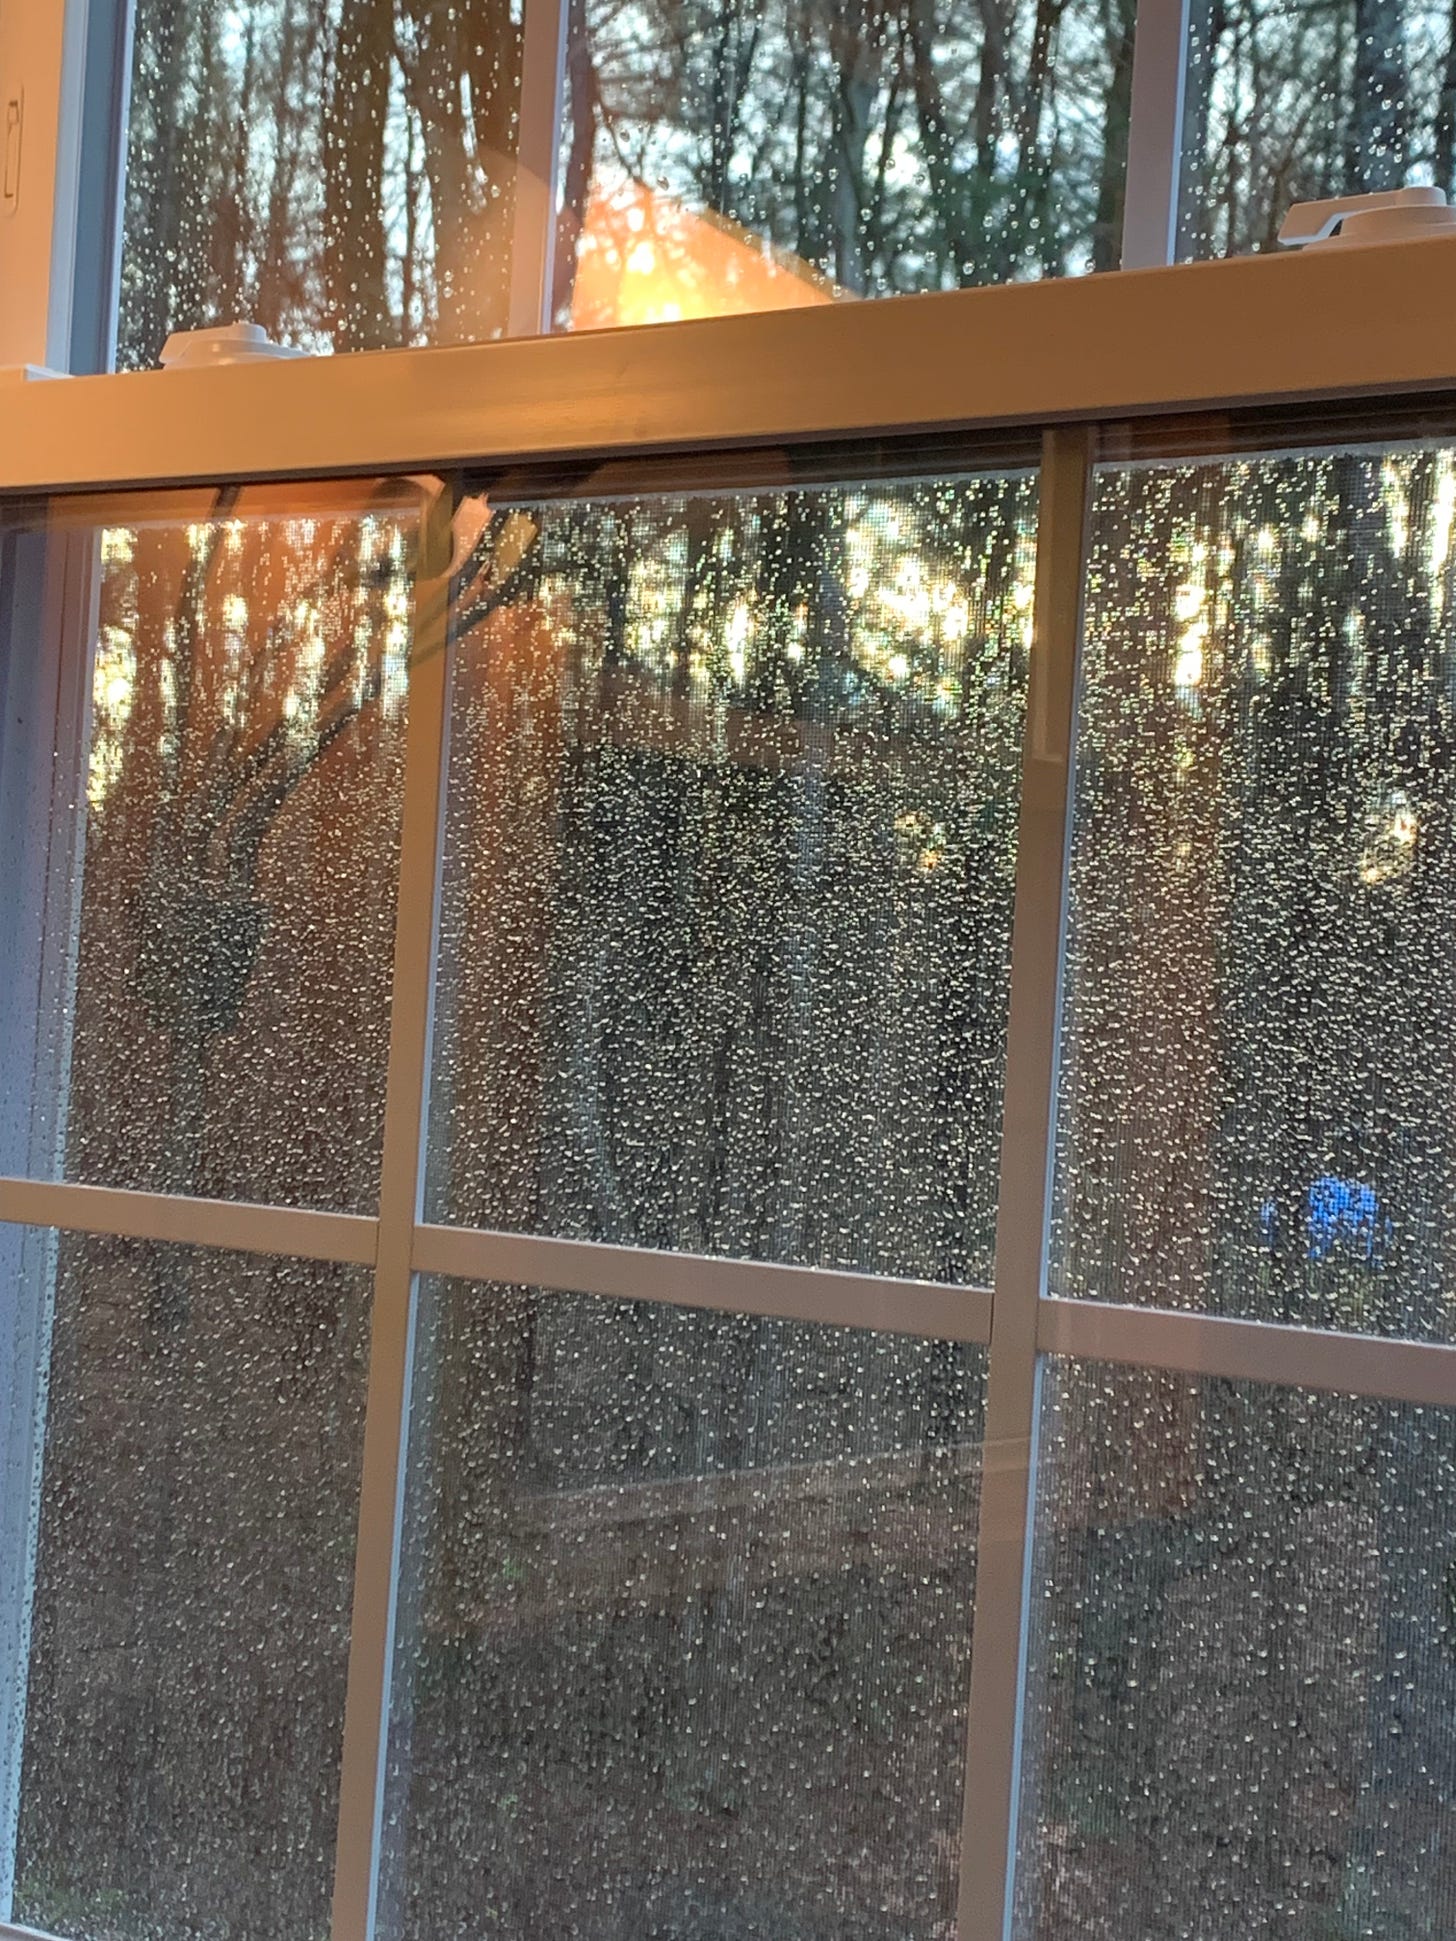 photo of a window with rain on it. Light is reflecting on the glass both from indoors and from the sunset outside.